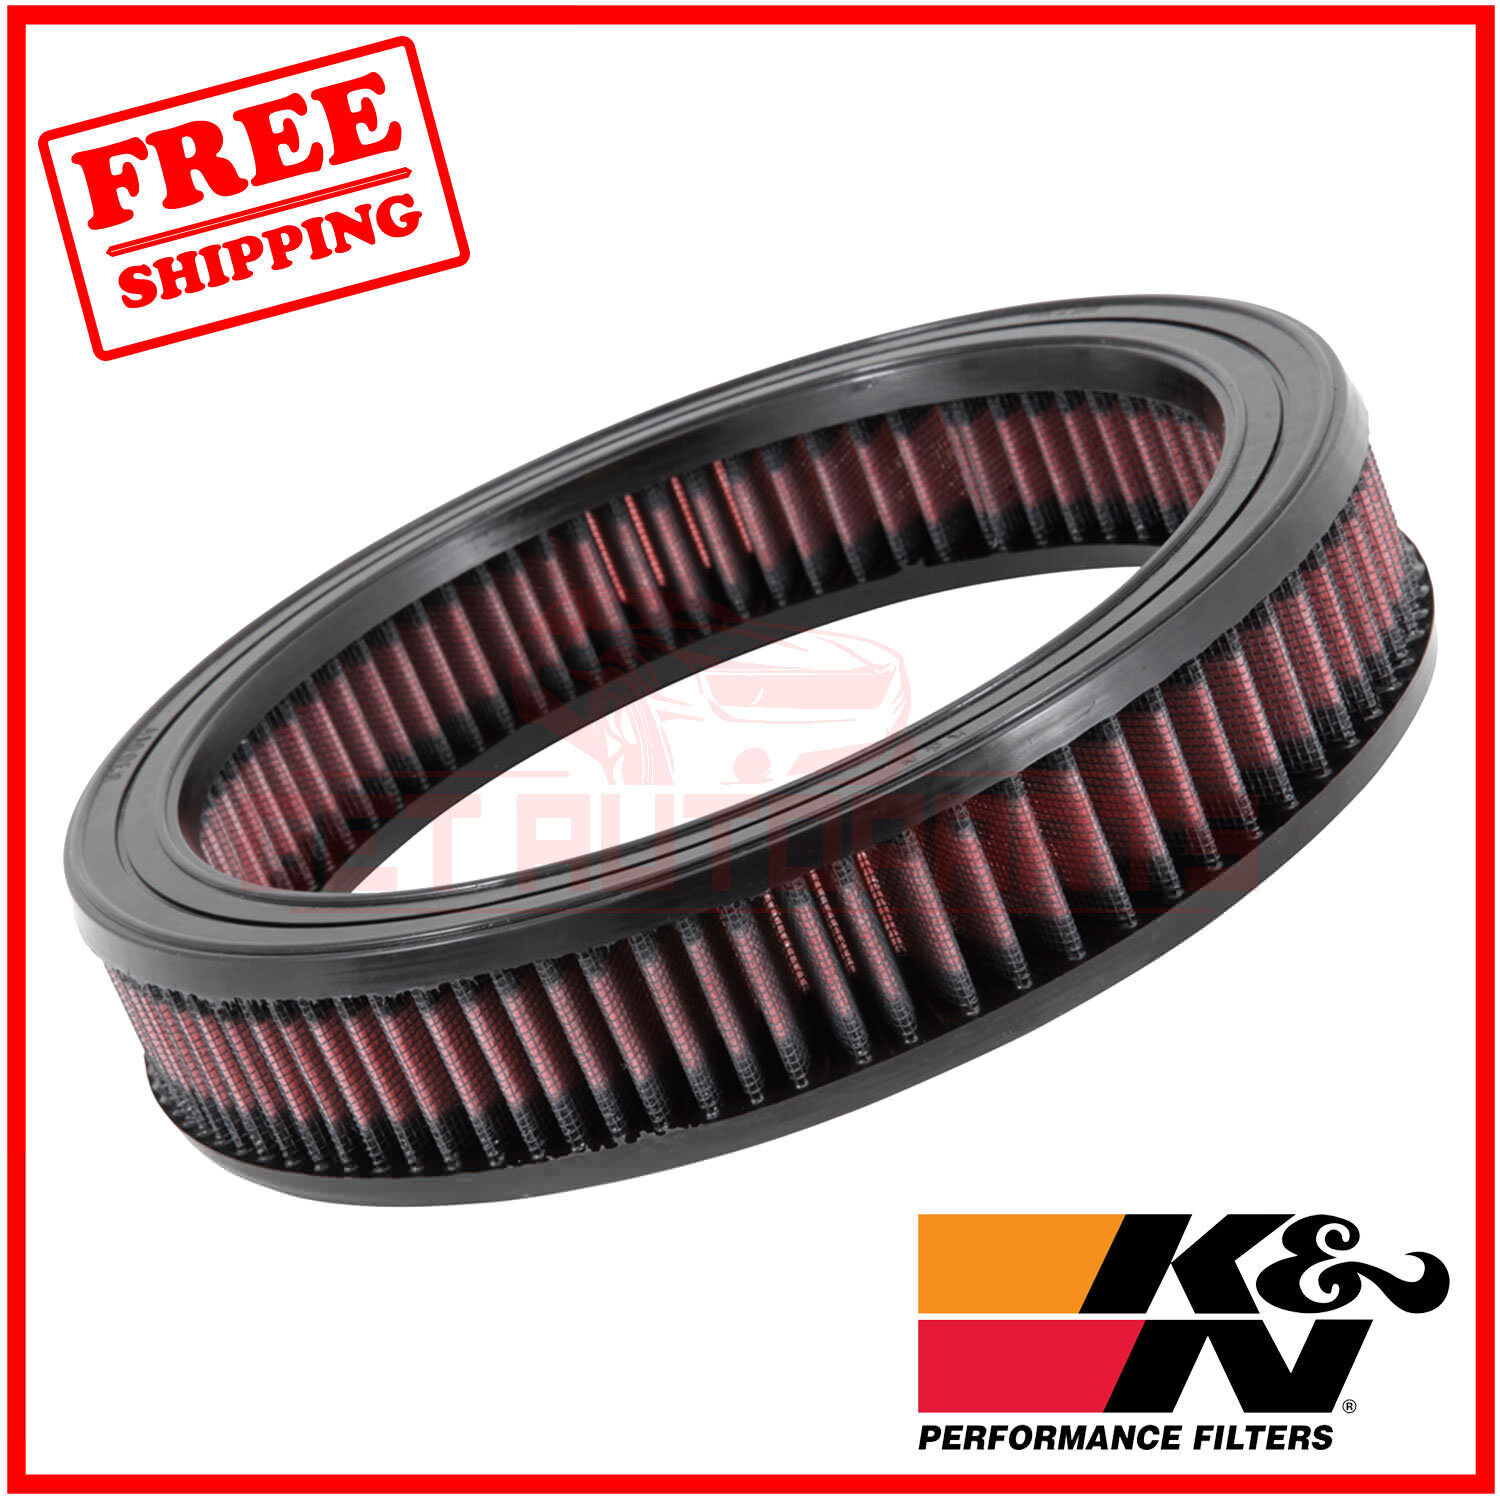 K&N Replacement Air Filter for Chevrolet Biscayne 1962-1972